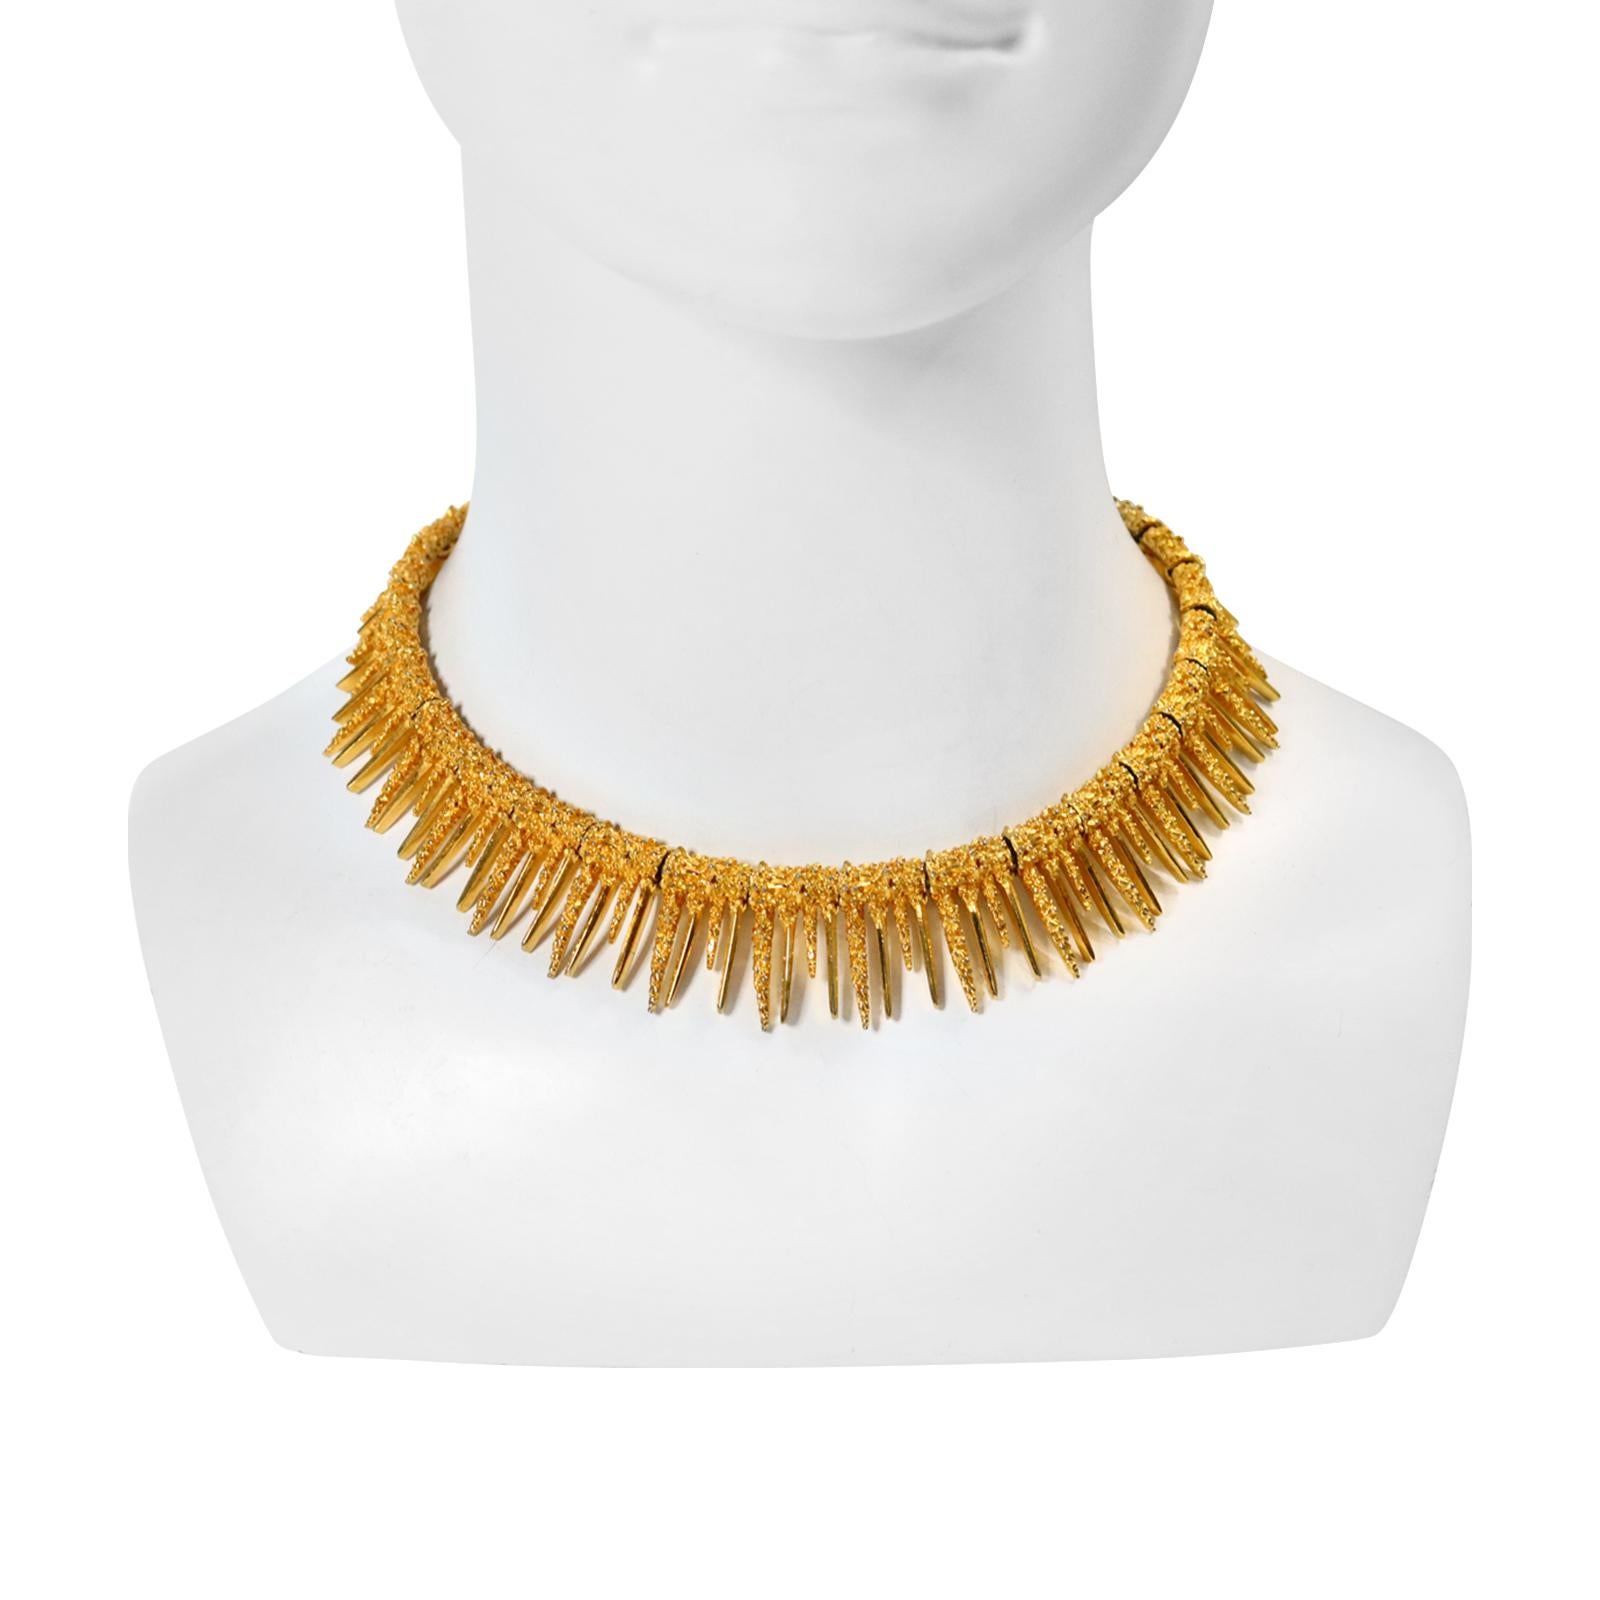 Vintage Boucher Textured Spiky Gold Tone Choker Necklace. The spikes are all at different sizes. Some are textured and some are shiny to add contrast.  There is an extender that is on the necklace. 14